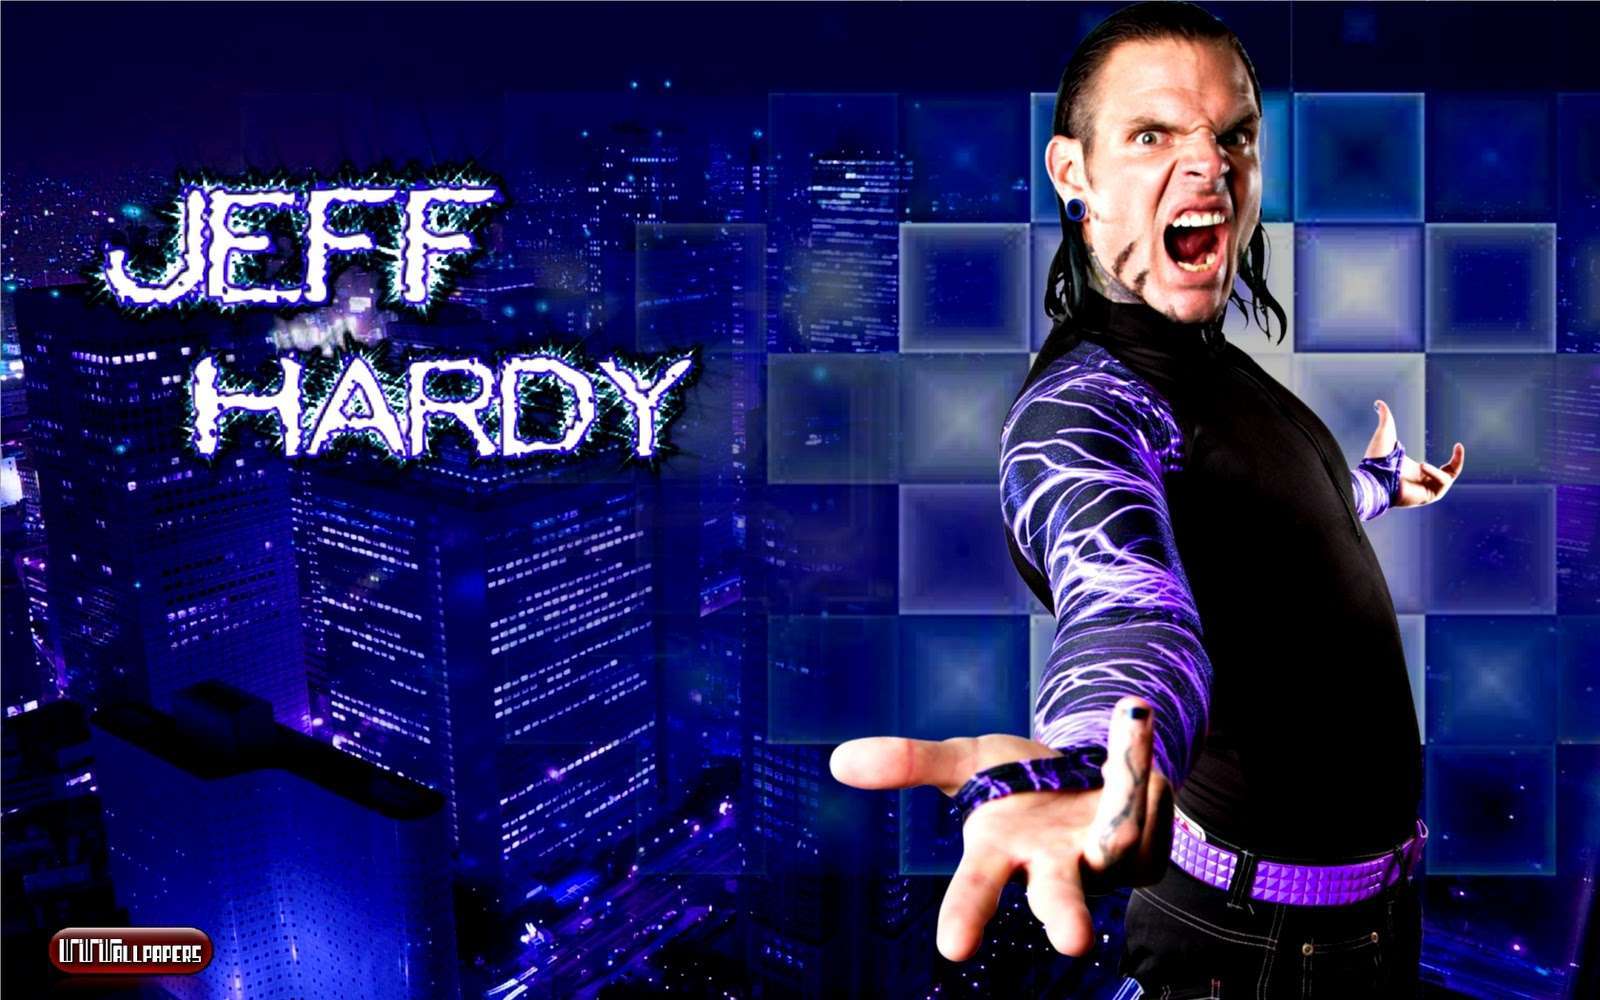 Jeff Hardy Wallpaper Discover more Jeff Hardy Jeffrey Hardy WWE WWE Jeff  Hardy wallpaper httpswwwixpapcomjeffhardyw  Jeff hardy Hardy  Wwe jeff hardy